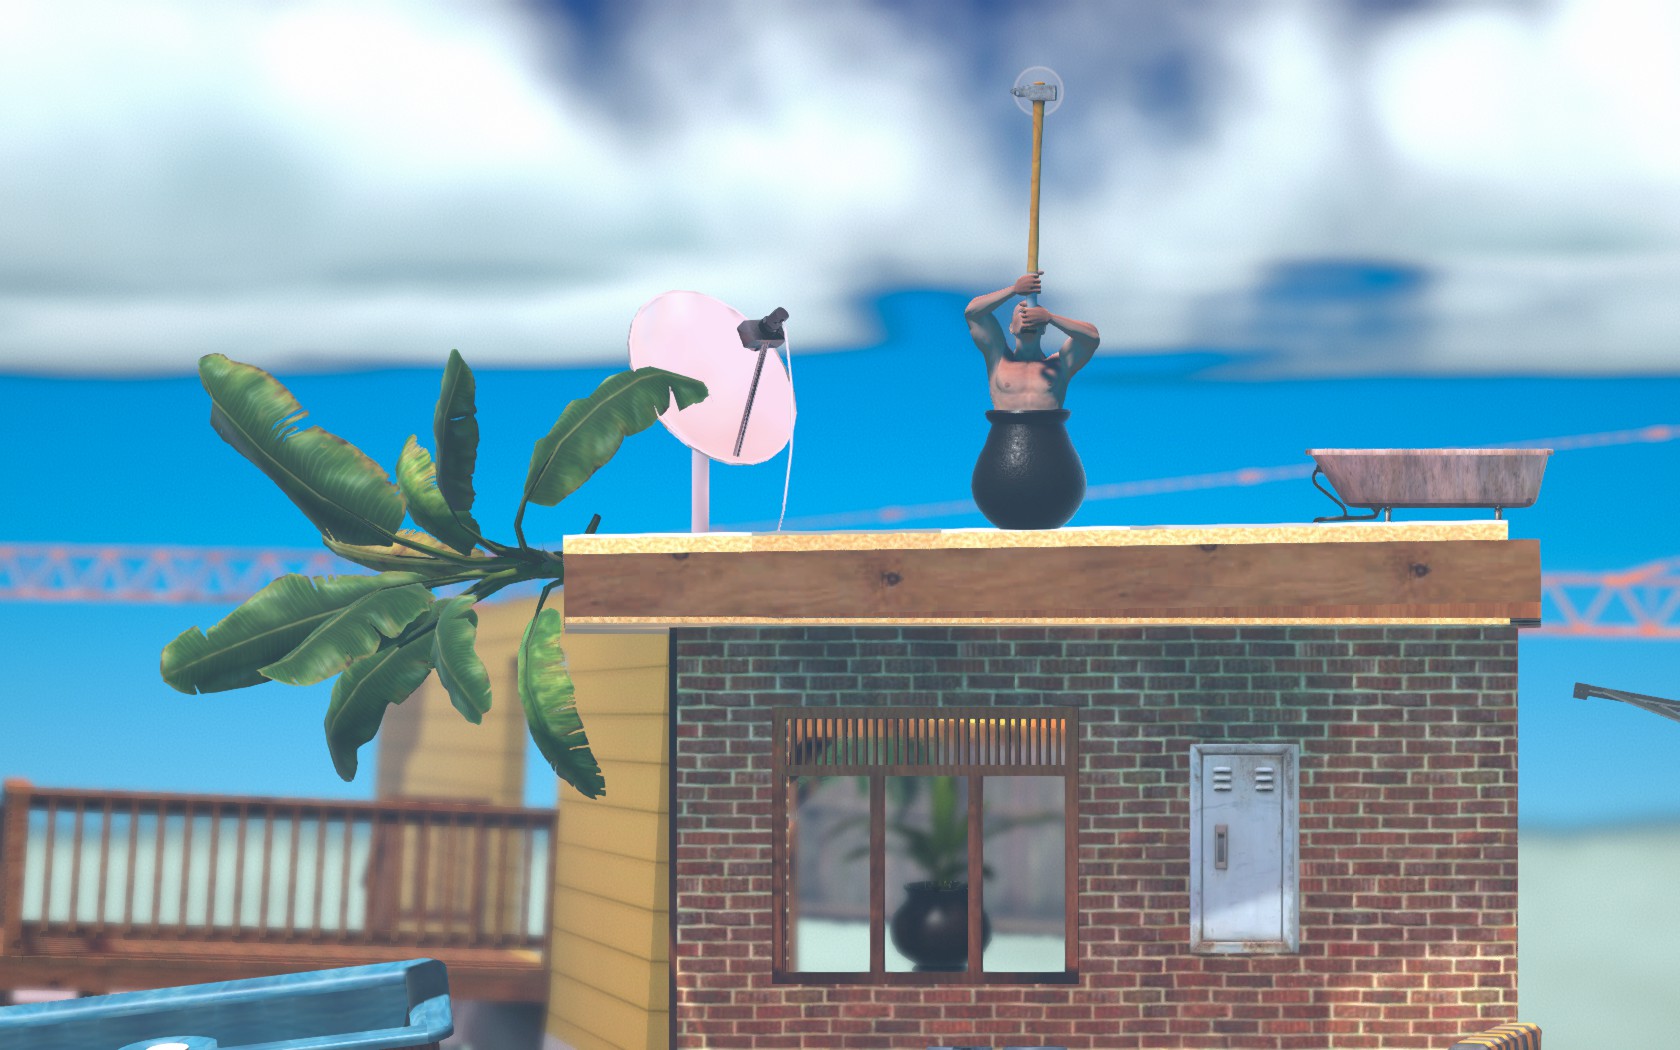 Getting Over It with Bennett Foddy on Steam